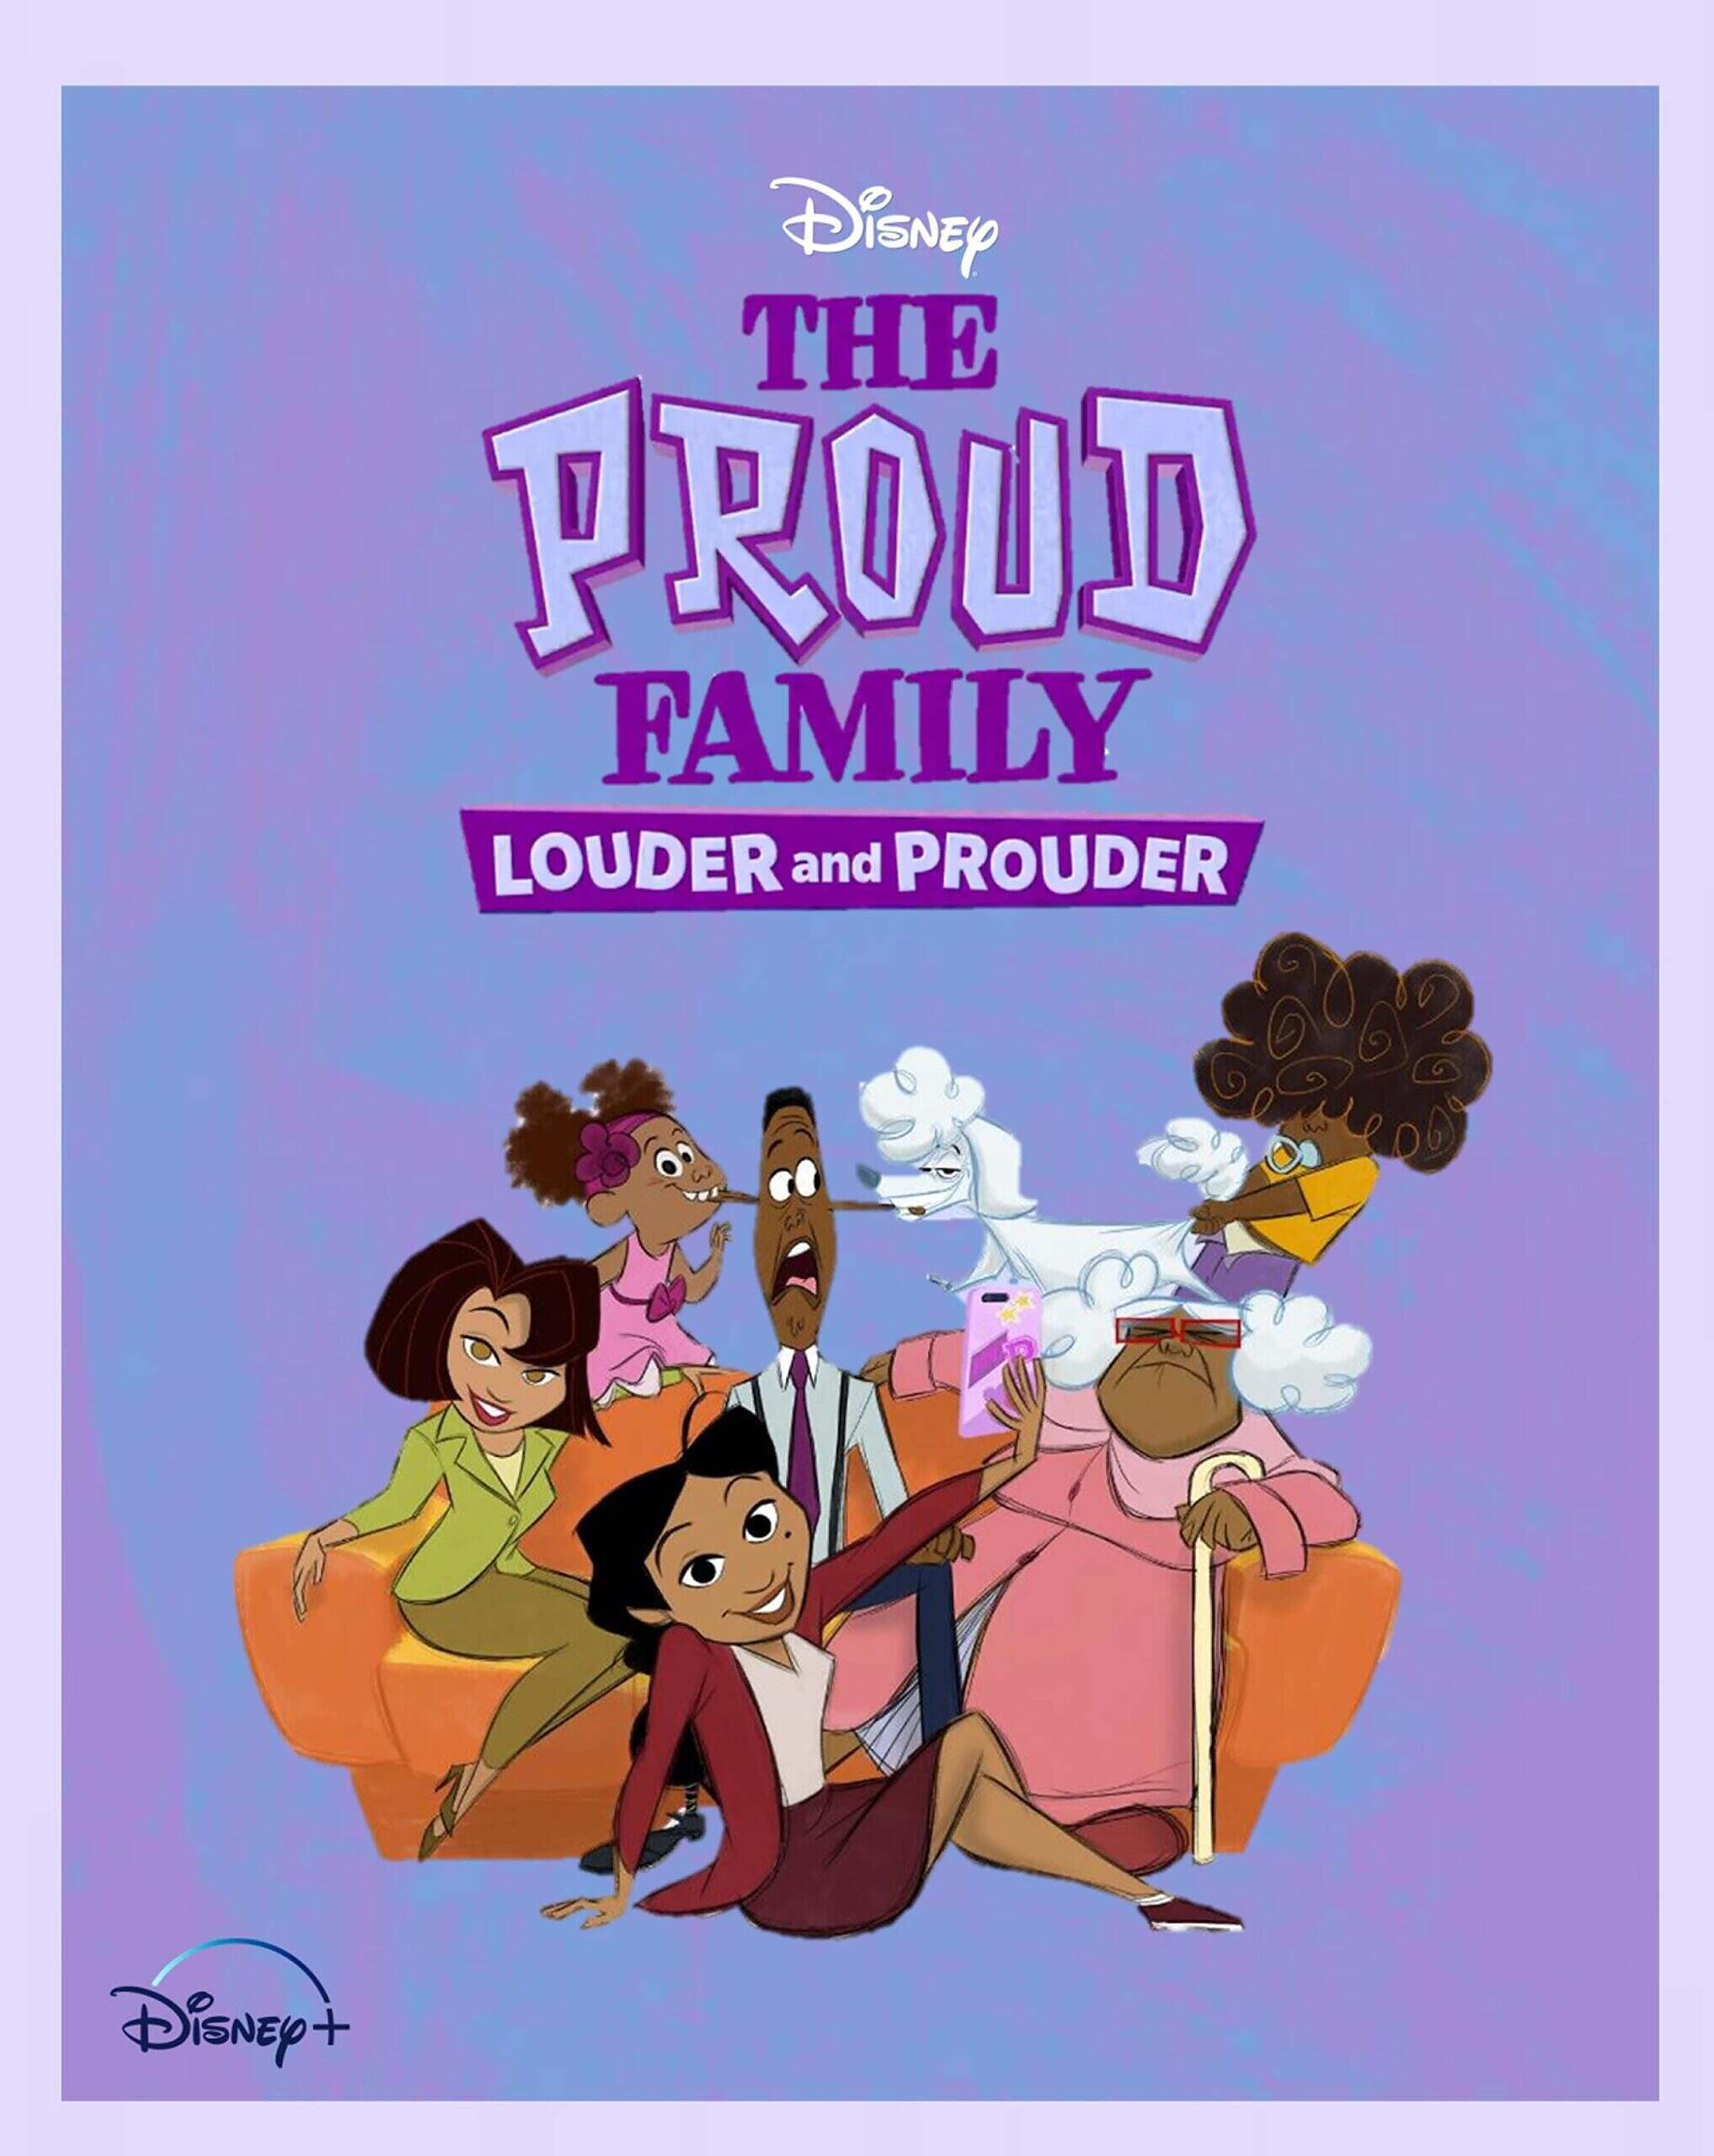 2nd Trailer For Disney+ Original Series ‘The Proud Family: Louder And Prouder’